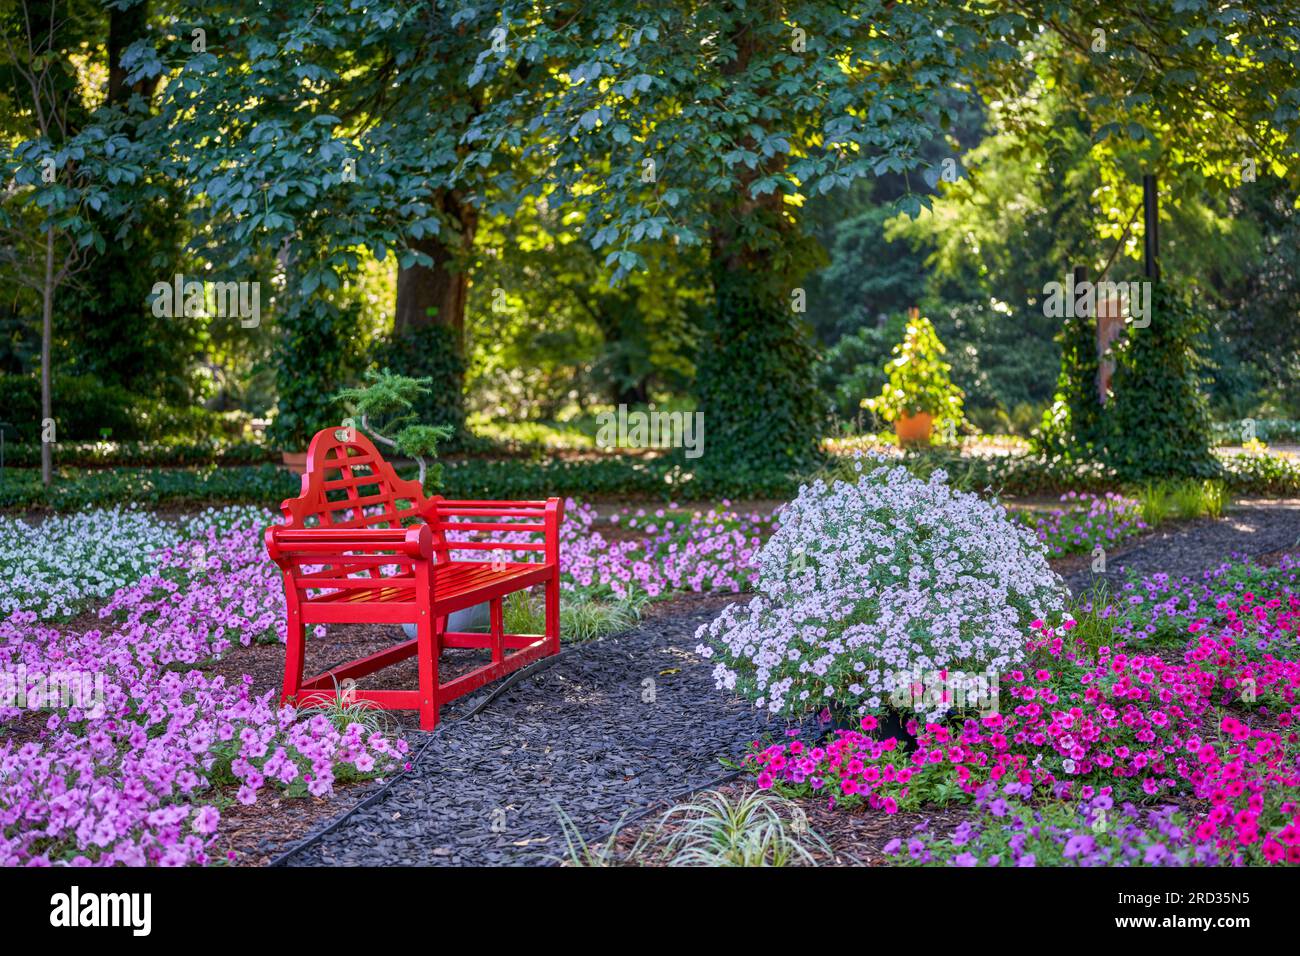 Red wooden ornamental bench among multicolour blooming petunias Botanical Gardens Wroclaw Stock Photo